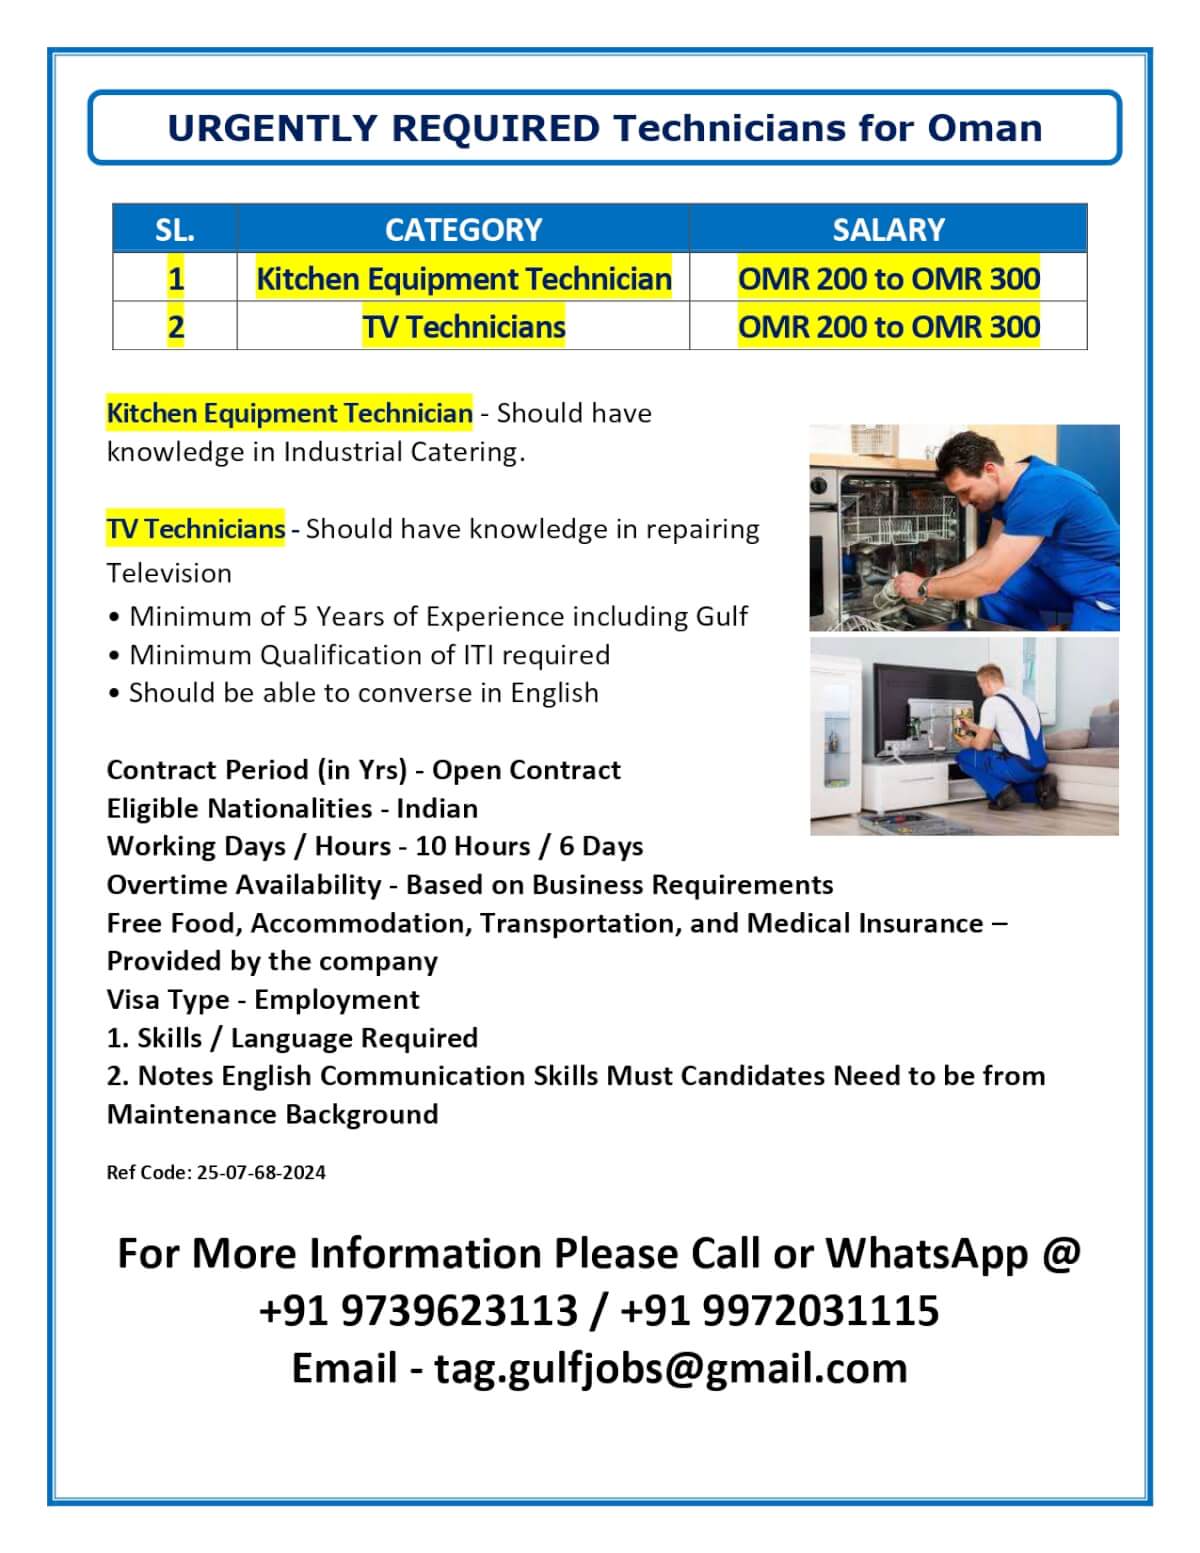 URGENTLY REQUIRED Technicians for Oman